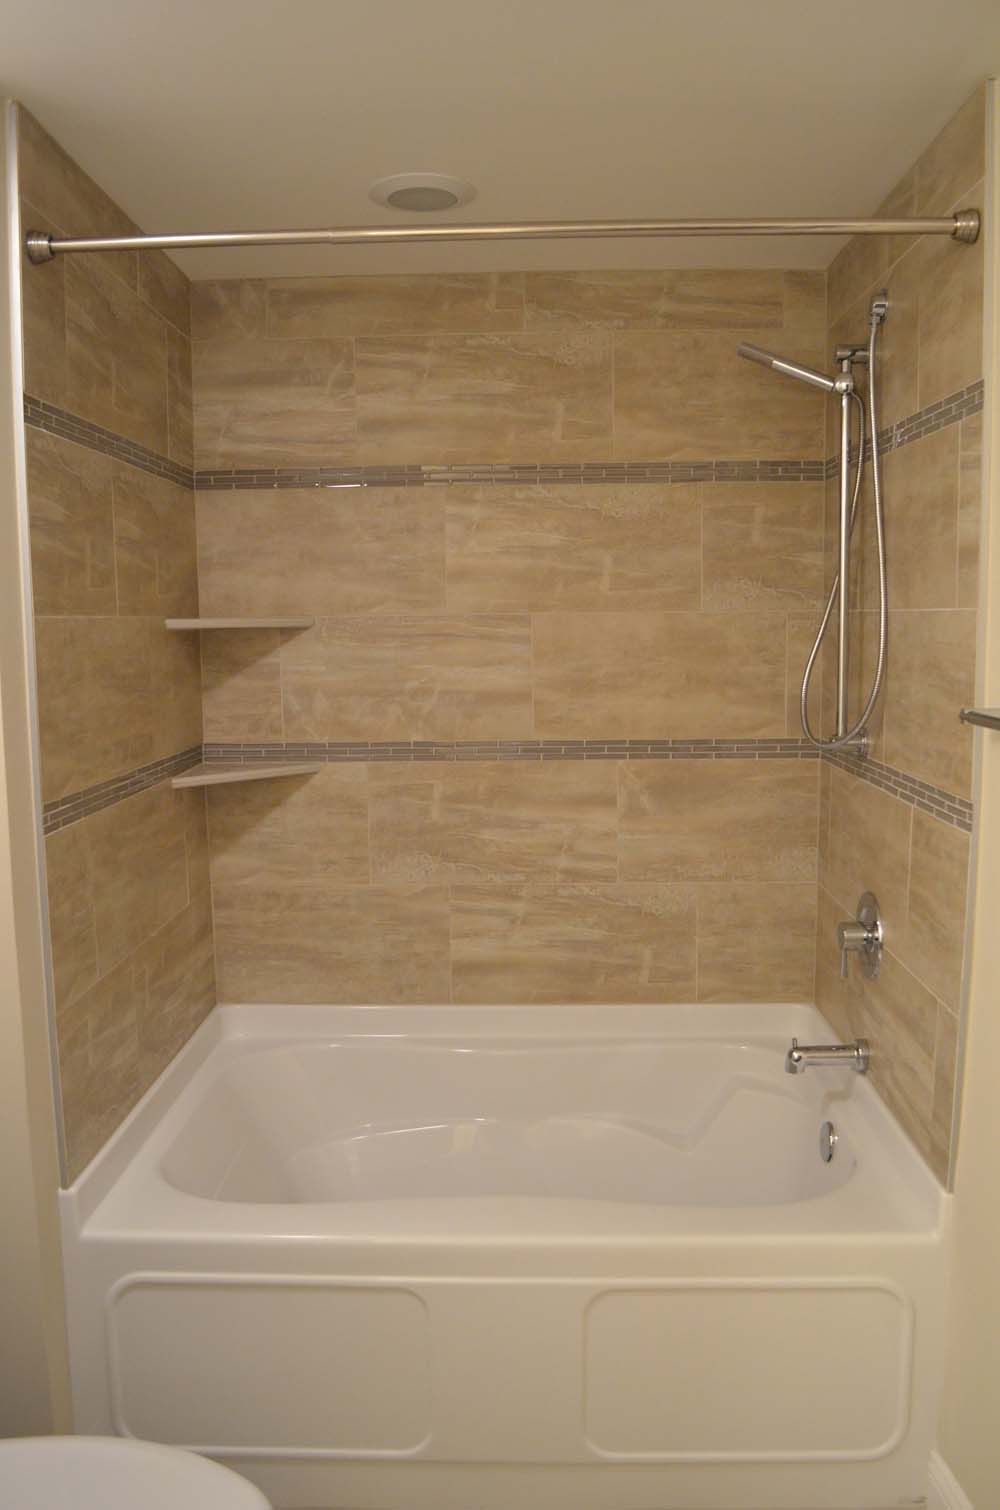 42" x 60" Tub with tile walls